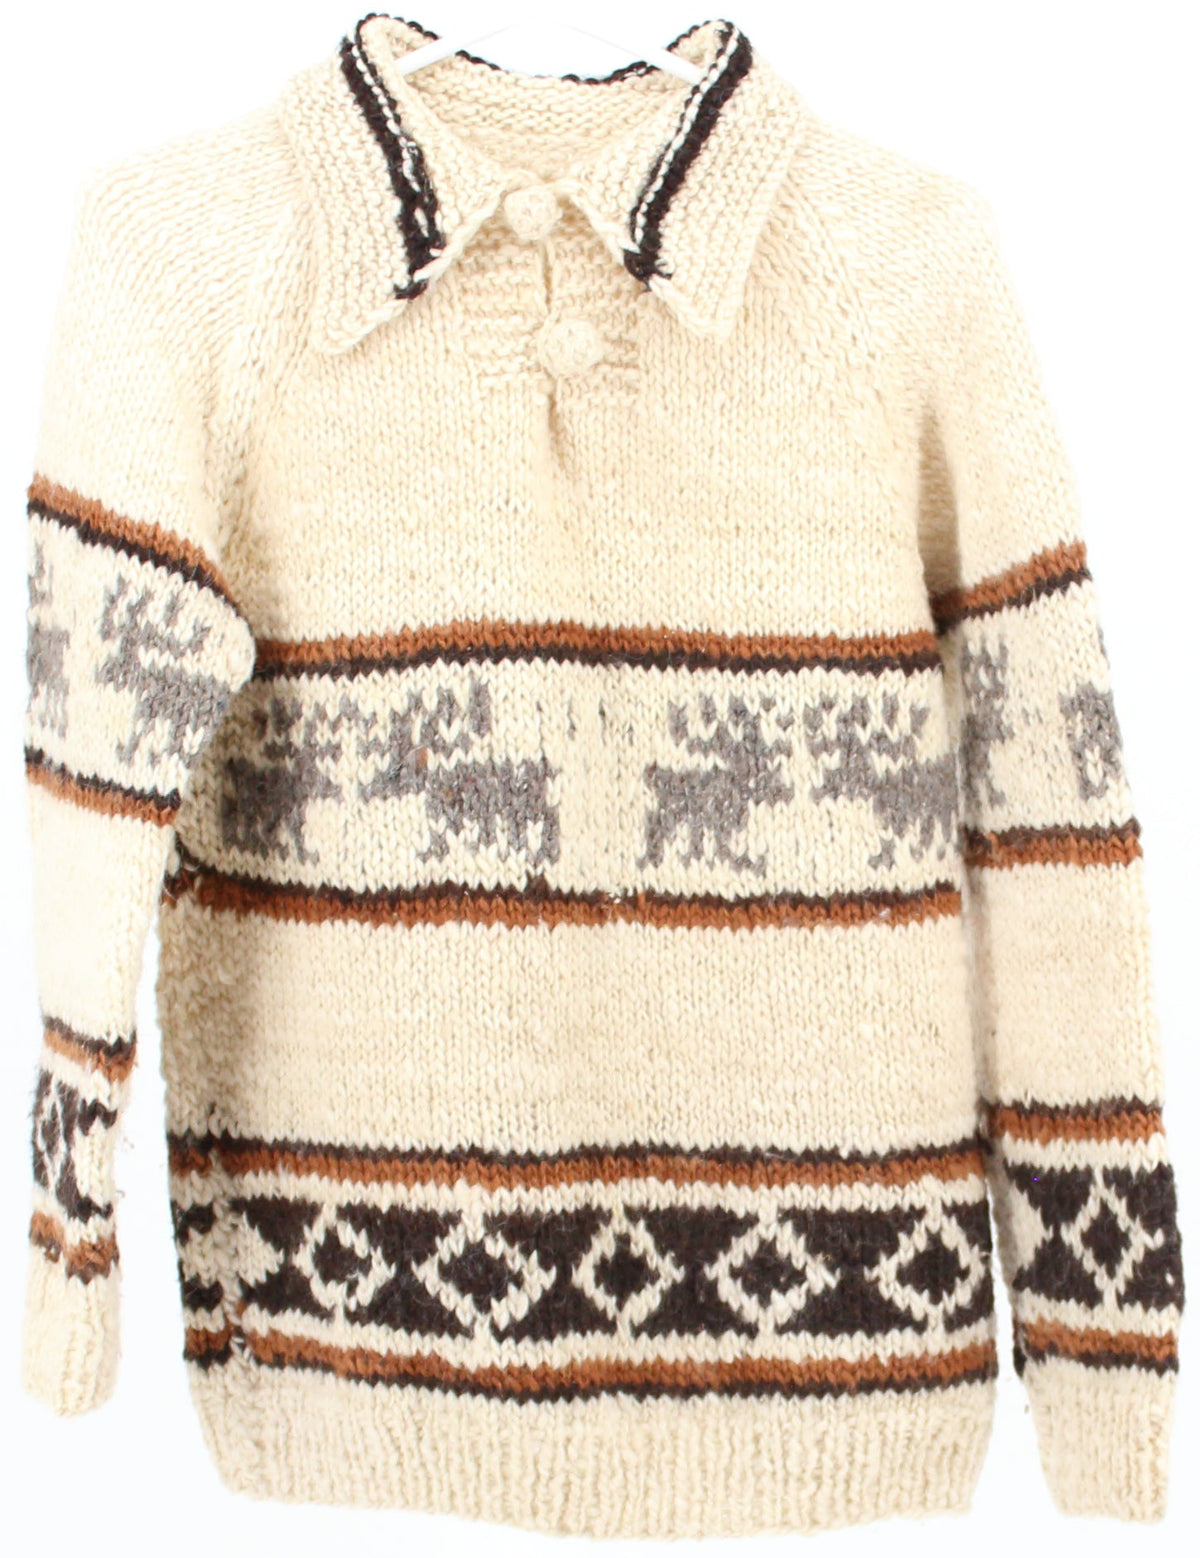 Jacquard Knit Sweater With Knit Buttons